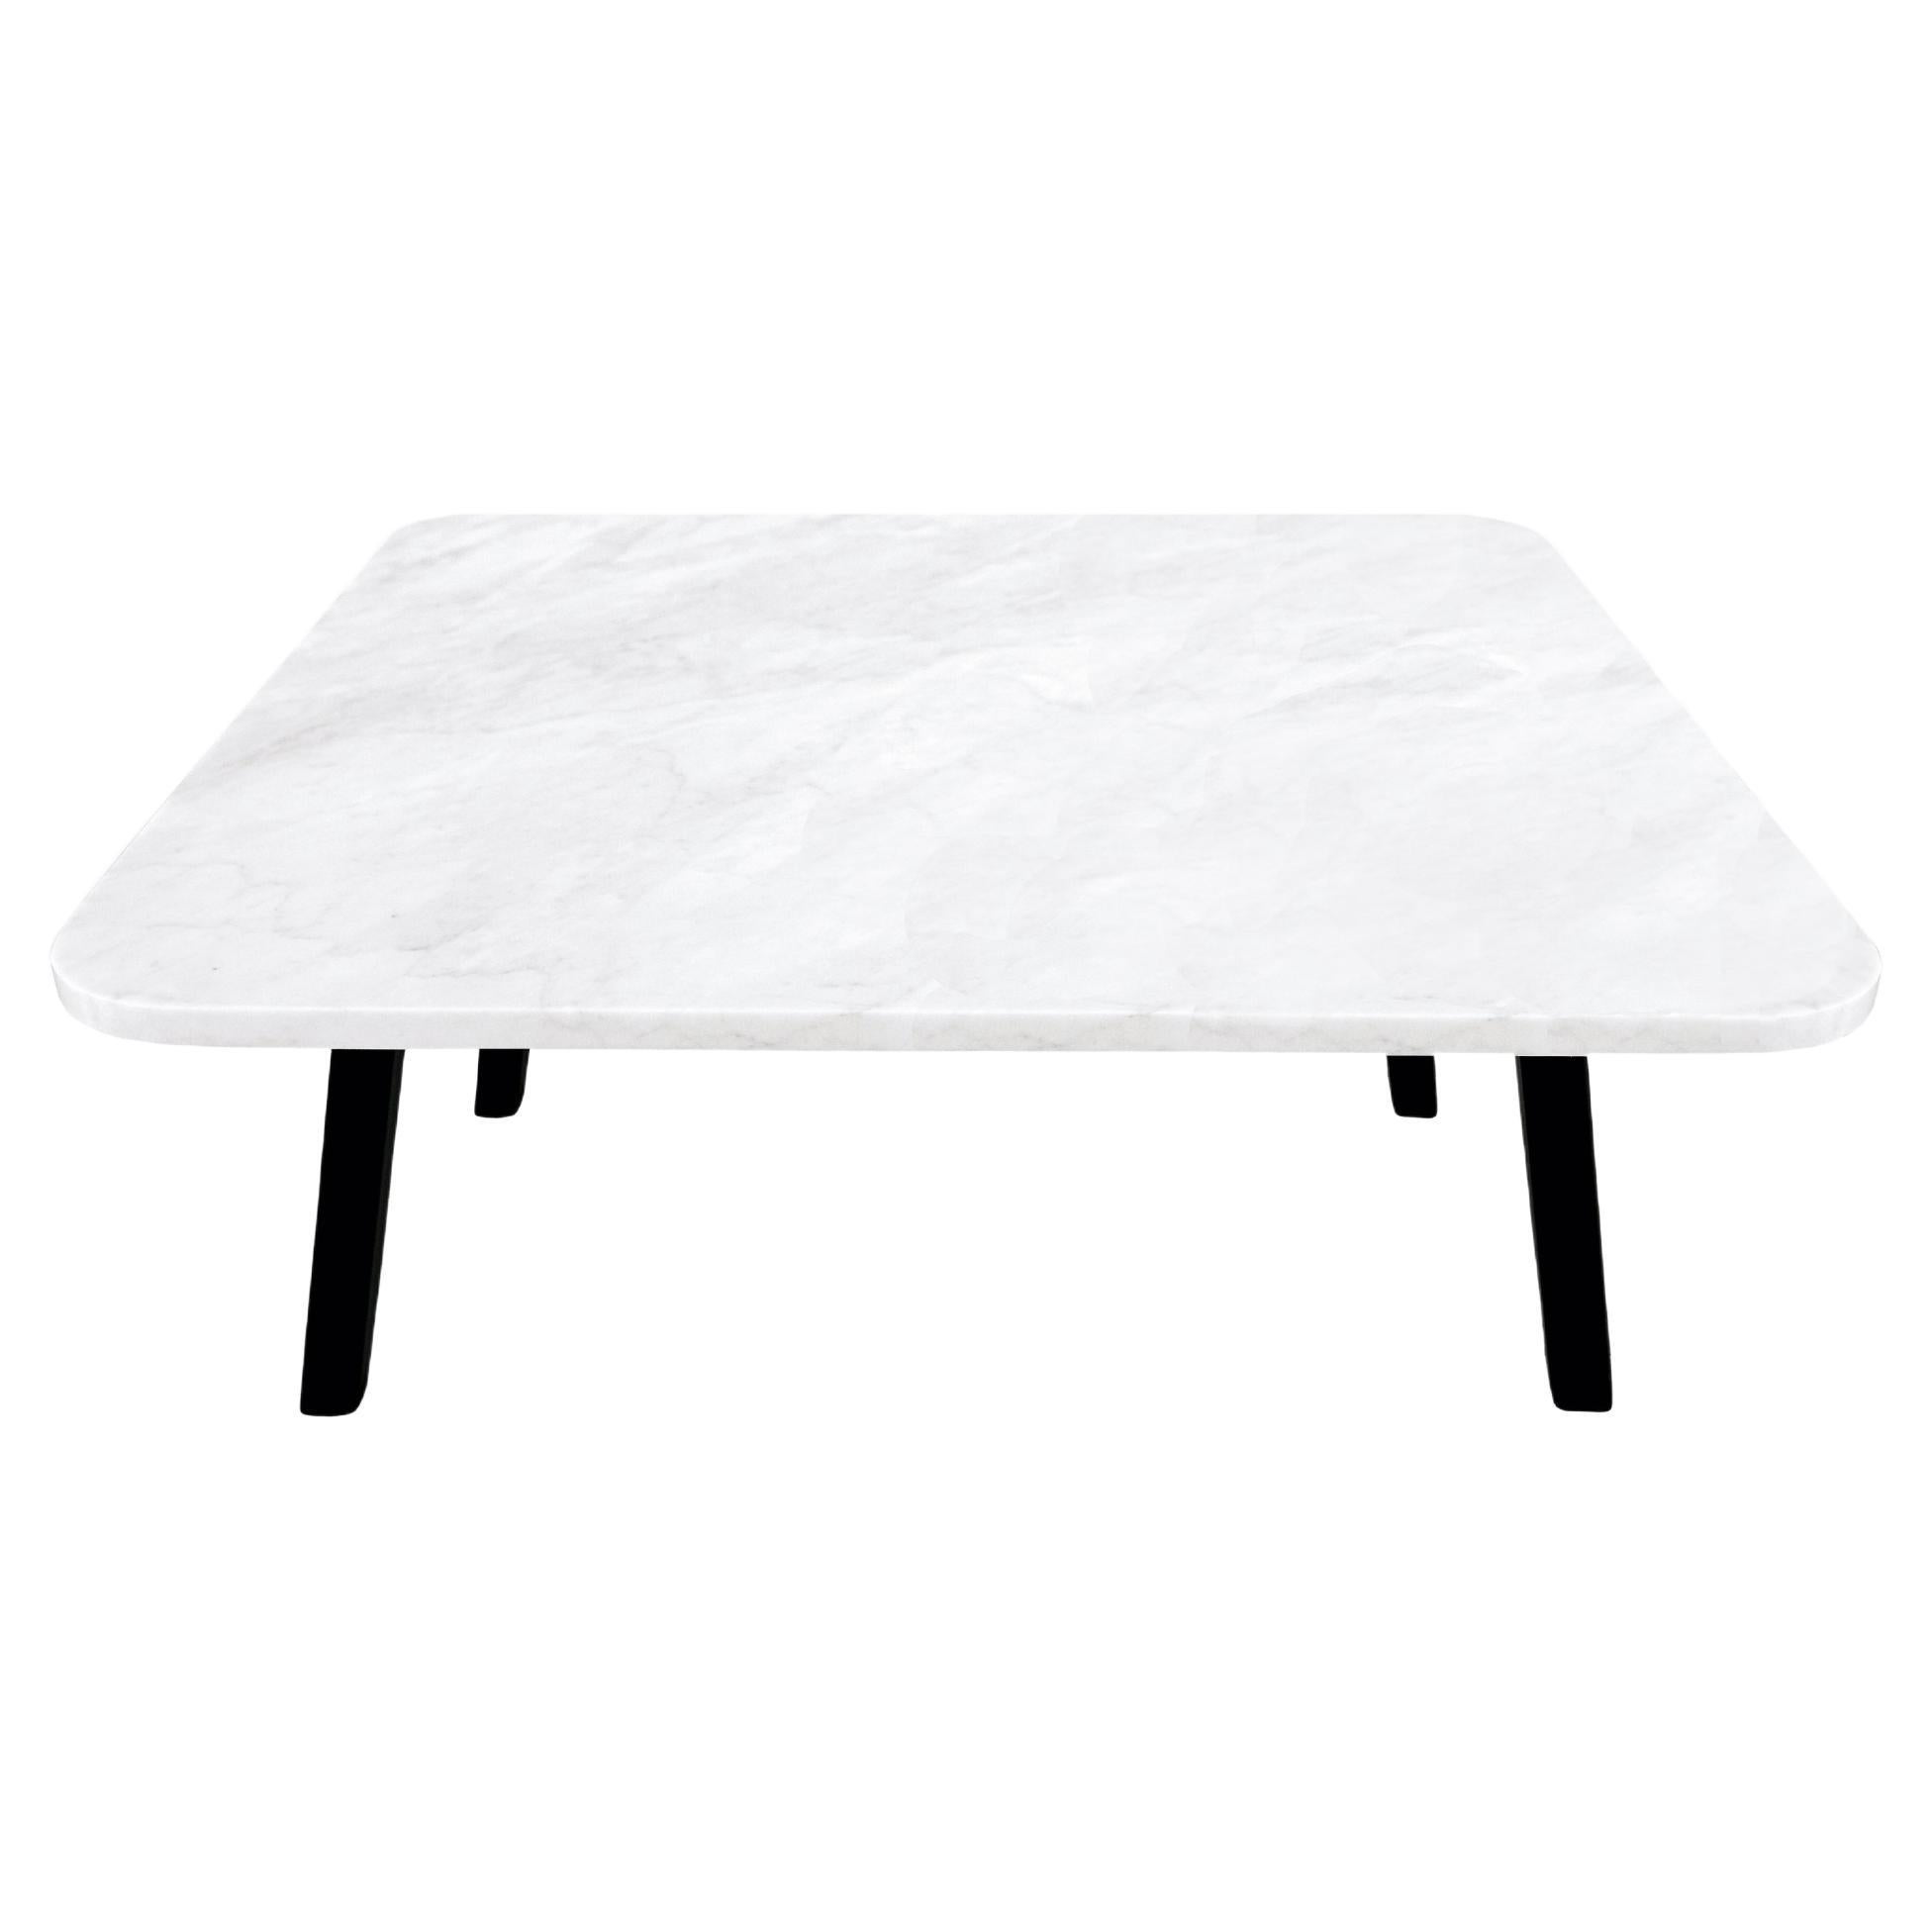 White Form D Coffee Table by Un’common